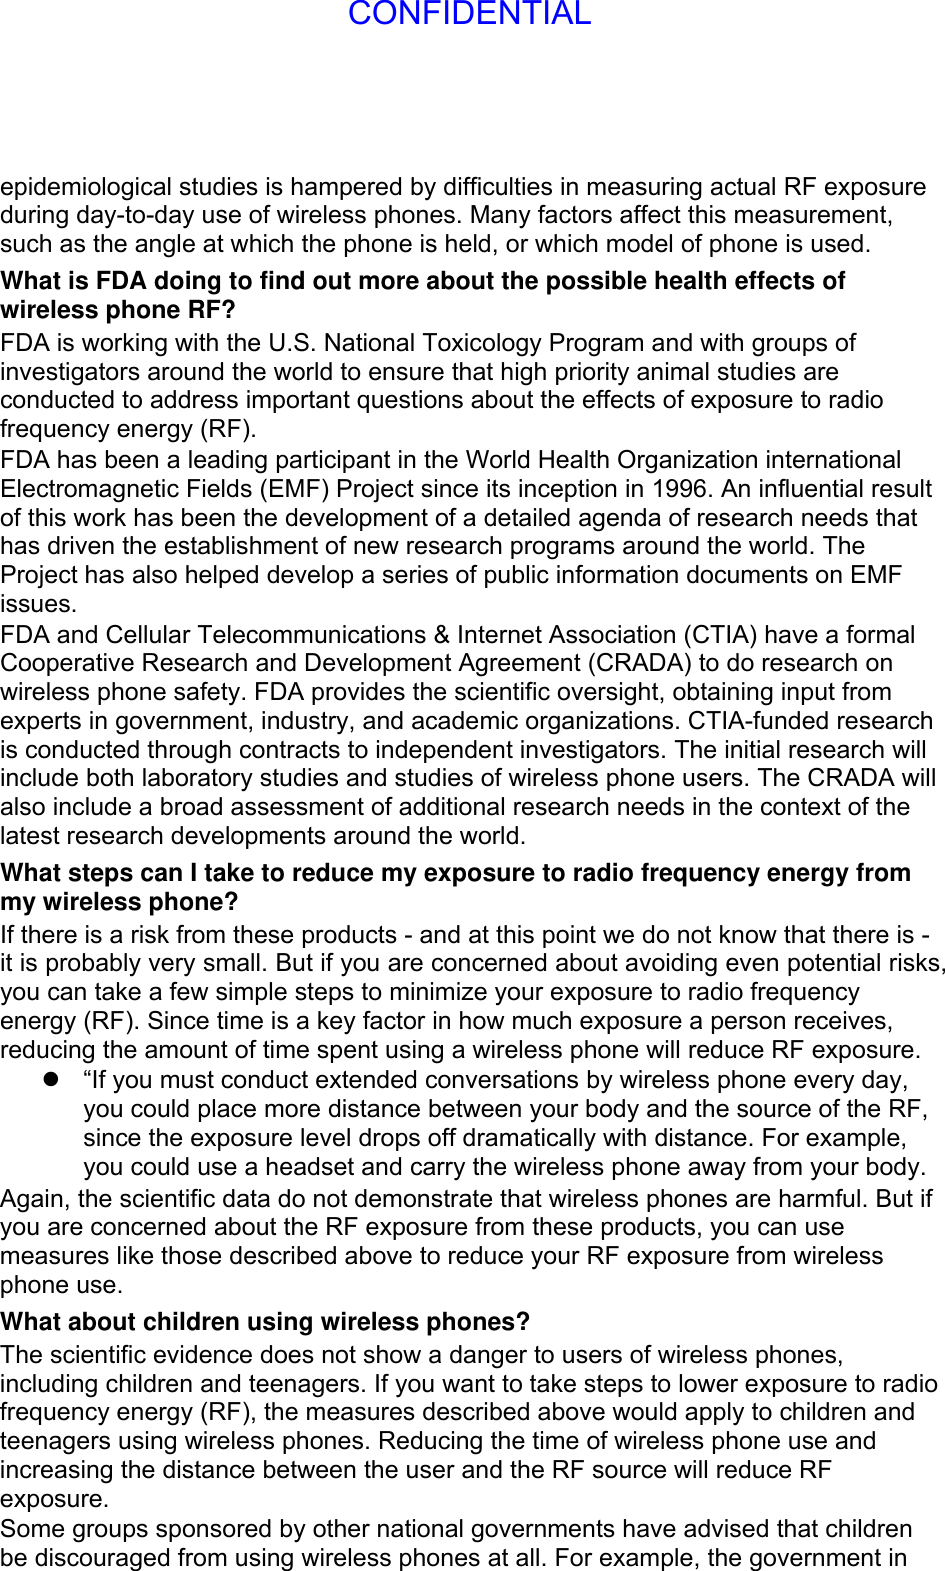 epidemiological studies is hampered by difficulties in measuring actual RF exposure during day-to-day use of wireless phones. Many factors affect this measurement, such as the angle at which the phone is held, or which model of phone is used. What is FDA doing to find out more about the possible health effects of wireless phone RF? FDA is working with the U.S. National Toxicology Program and with groups of investigators around the world to ensure that high priority animal studies are conducted to address important questions about the effects of exposure to radio frequency energy (RF). FDA has been a leading participant in the World Health Organization international Electromagnetic Fields (EMF) Project since its inception in 1996. An influential result of this work has been the development of a detailed agenda of research needs that has driven the establishment of new research programs around the world. The Project has also helped develop a series of public information documents on EMF issues. FDA and Cellular Telecommunications &amp; Internet Association (CTIA) have a formal Cooperative Research and Development Agreement (CRADA) to do research on wireless phone safety. FDA provides the scientific oversight, obtaining input from experts in government, industry, and academic organizations. CTIA-funded research is conducted through contracts to independent investigators. The initial research will include both laboratory studies and studies of wireless phone users. The CRADA will also include a broad assessment of additional research needs in the context of the latest research developments around the world. What steps can I take to reduce my exposure to radio frequency energy from my wireless phone? If there is a risk from these products - and at this point we do not know that there is - it is probably very small. But if you are concerned about avoiding even potential risks, you can take a few simple steps to minimize your exposure to radio frequency energy (RF). Since time is a key factor in how much exposure a person receives, reducing the amount of time spent using a wireless phone will reduce RF exposure.   “If you must conduct extended conversations by wireless phone every day, you could place more distance between your body and the source of the RF, since the exposure level drops off dramatically with distance. For example, you could use a headset and carry the wireless phone away from your body. Again, the scientific data do not demonstrate that wireless phones are harmful. But if you are concerned about the RF exposure from these products, you can use measures like those described above to reduce your RF exposure from wireless phone use. What about children using wireless phones? The scientific evidence does not show a danger to users of wireless phones, including children and teenagers. If you want to take steps to lower exposure to radio frequency energy (RF), the measures described above would apply to children and teenagers using wireless phones. Reducing the time of wireless phone use and increasing the distance between the user and the RF source will reduce RF exposure. Some groups sponsored by other national governments have advised that children be discouraged from using wireless phones at all. For example, the government in CONFIDENTIAL